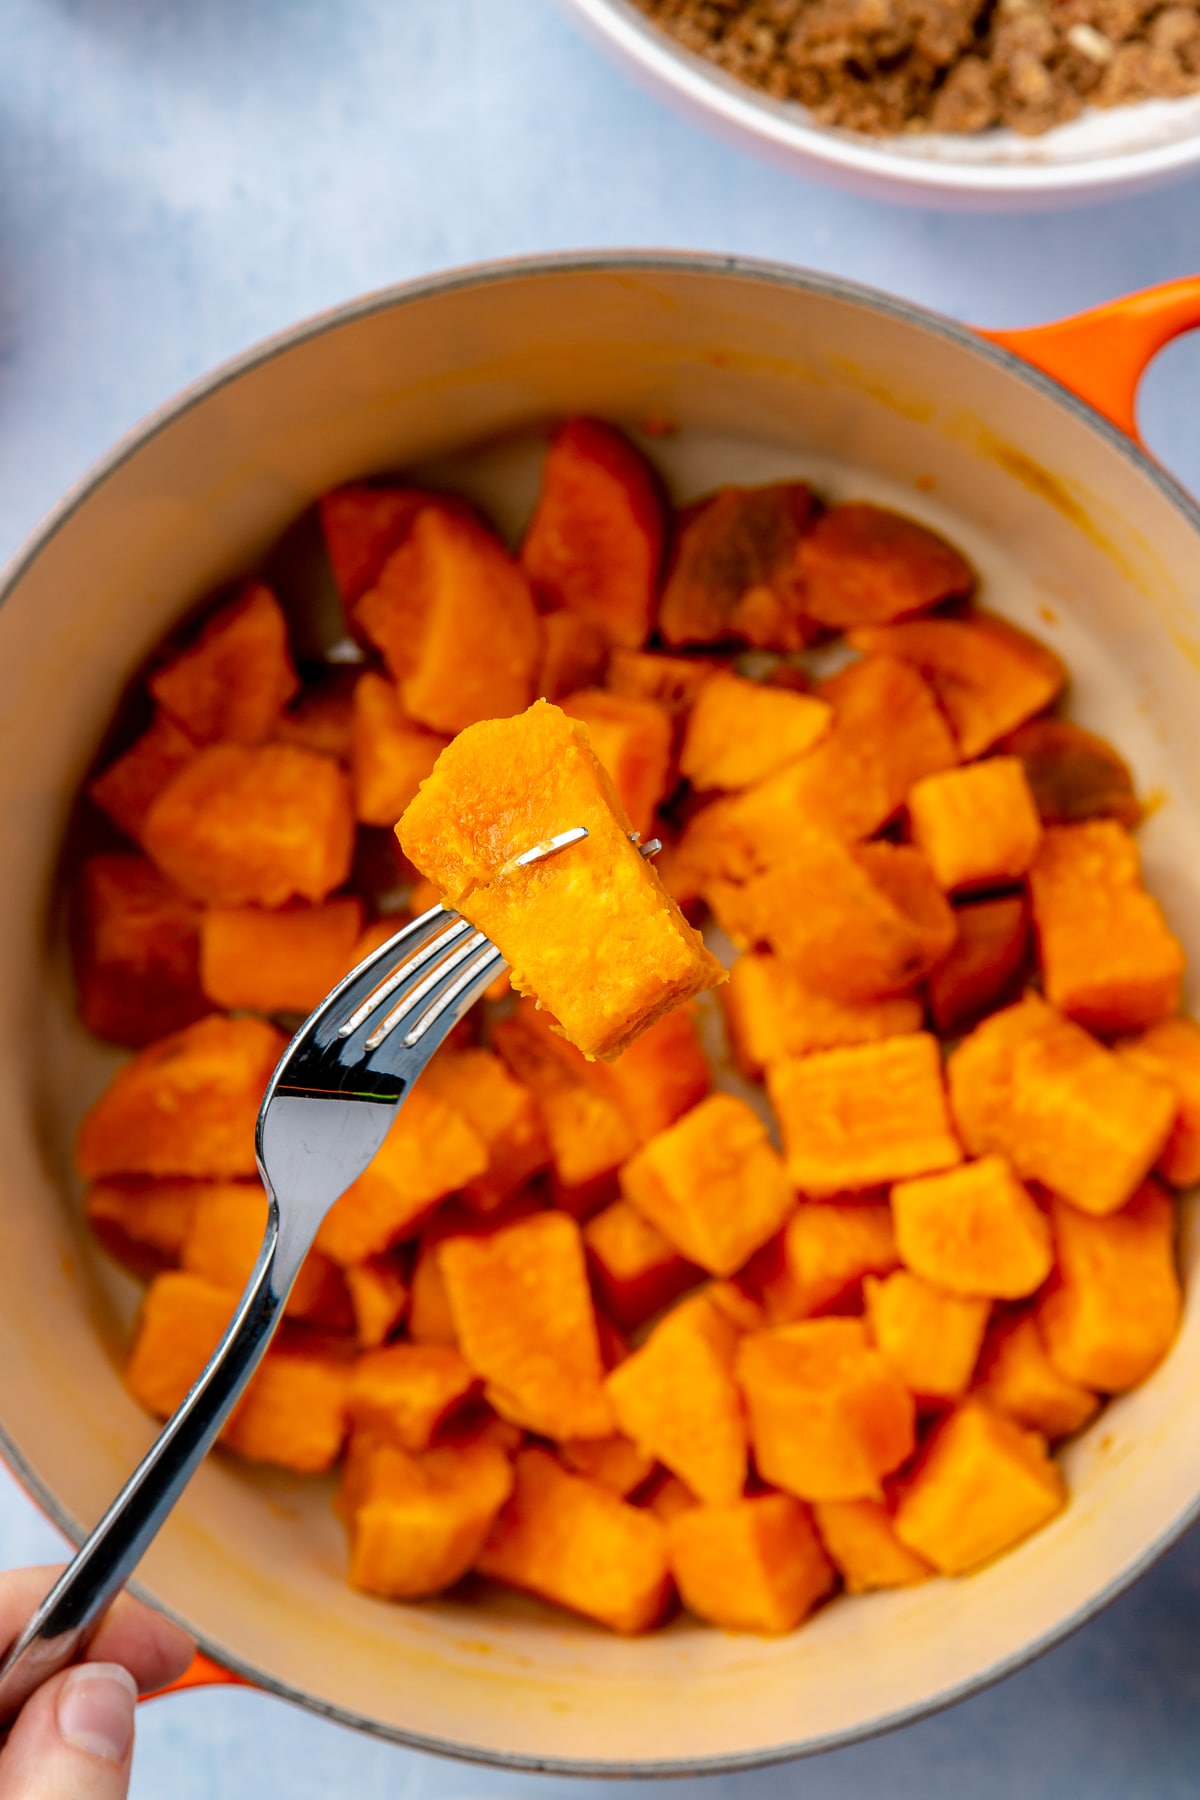 A piece of softened sweet potato is held with a fork over an orange, enameled pot of more softened, cubed sweet potato.